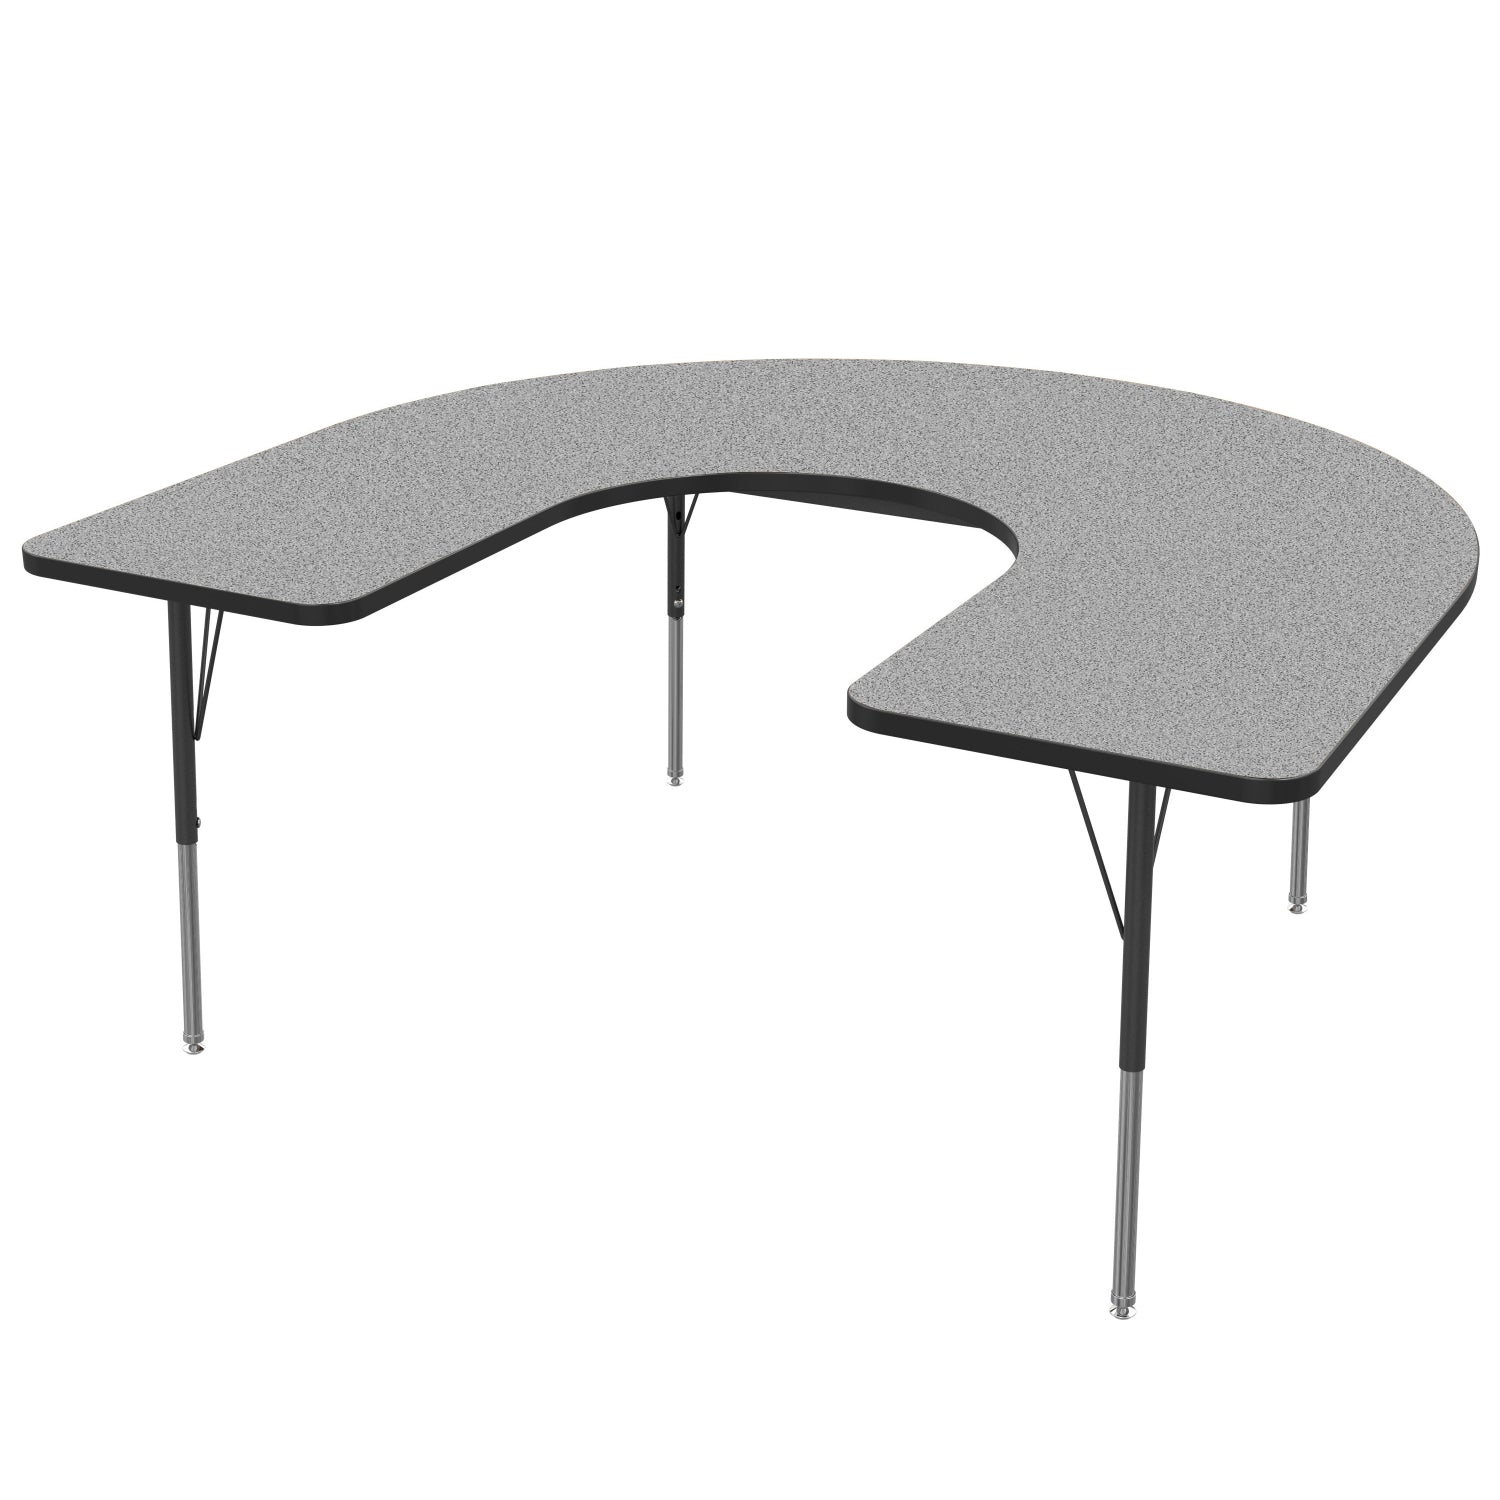 Activity Tables - Mahar Manufacturing® Activity Table - Horseshoe